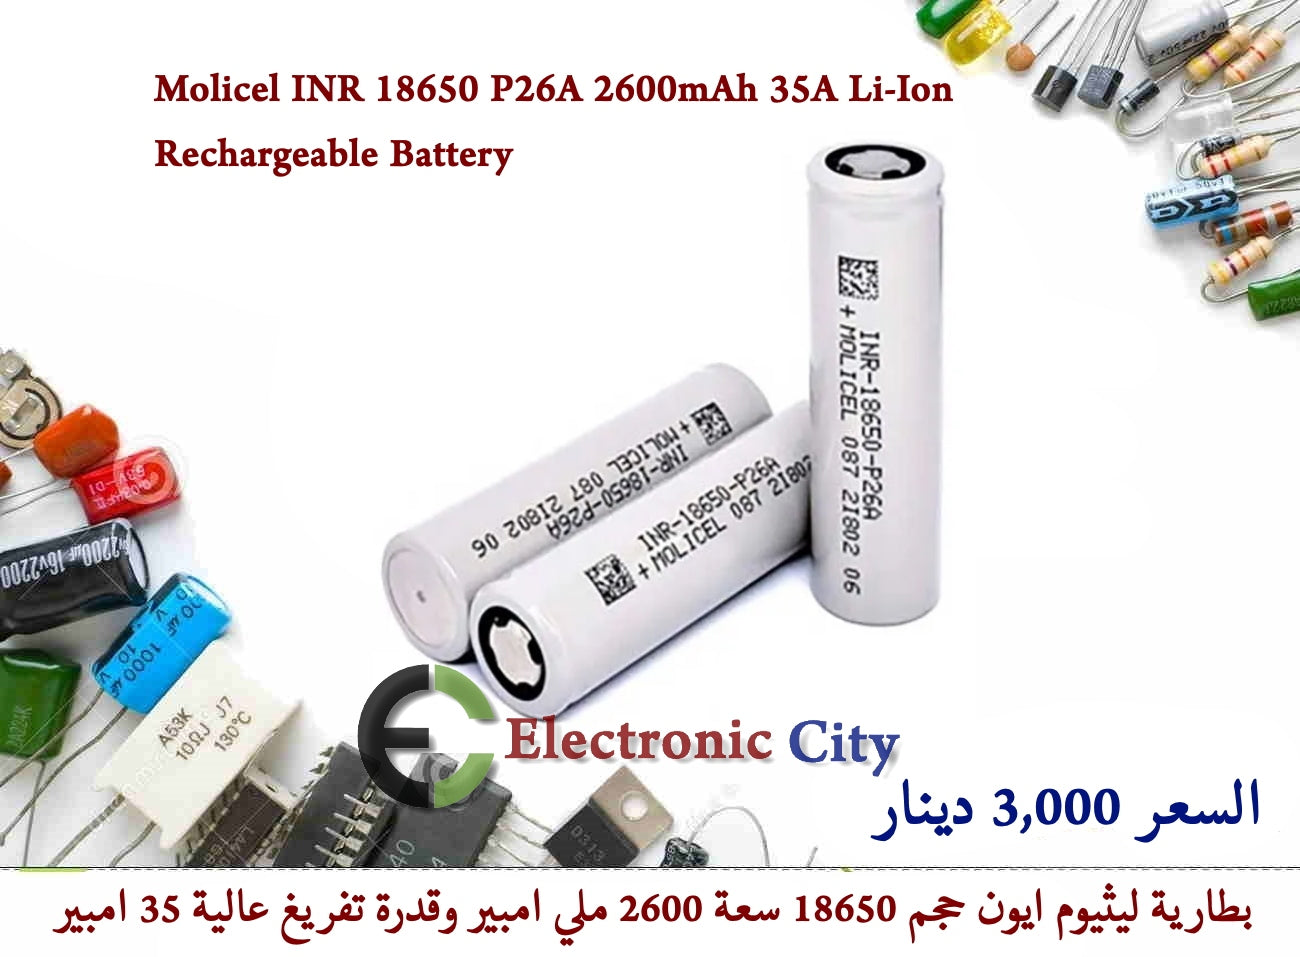 Molicel INR 18650 P26A 2600mAh 35A Li-Ion Rechargeable Battery